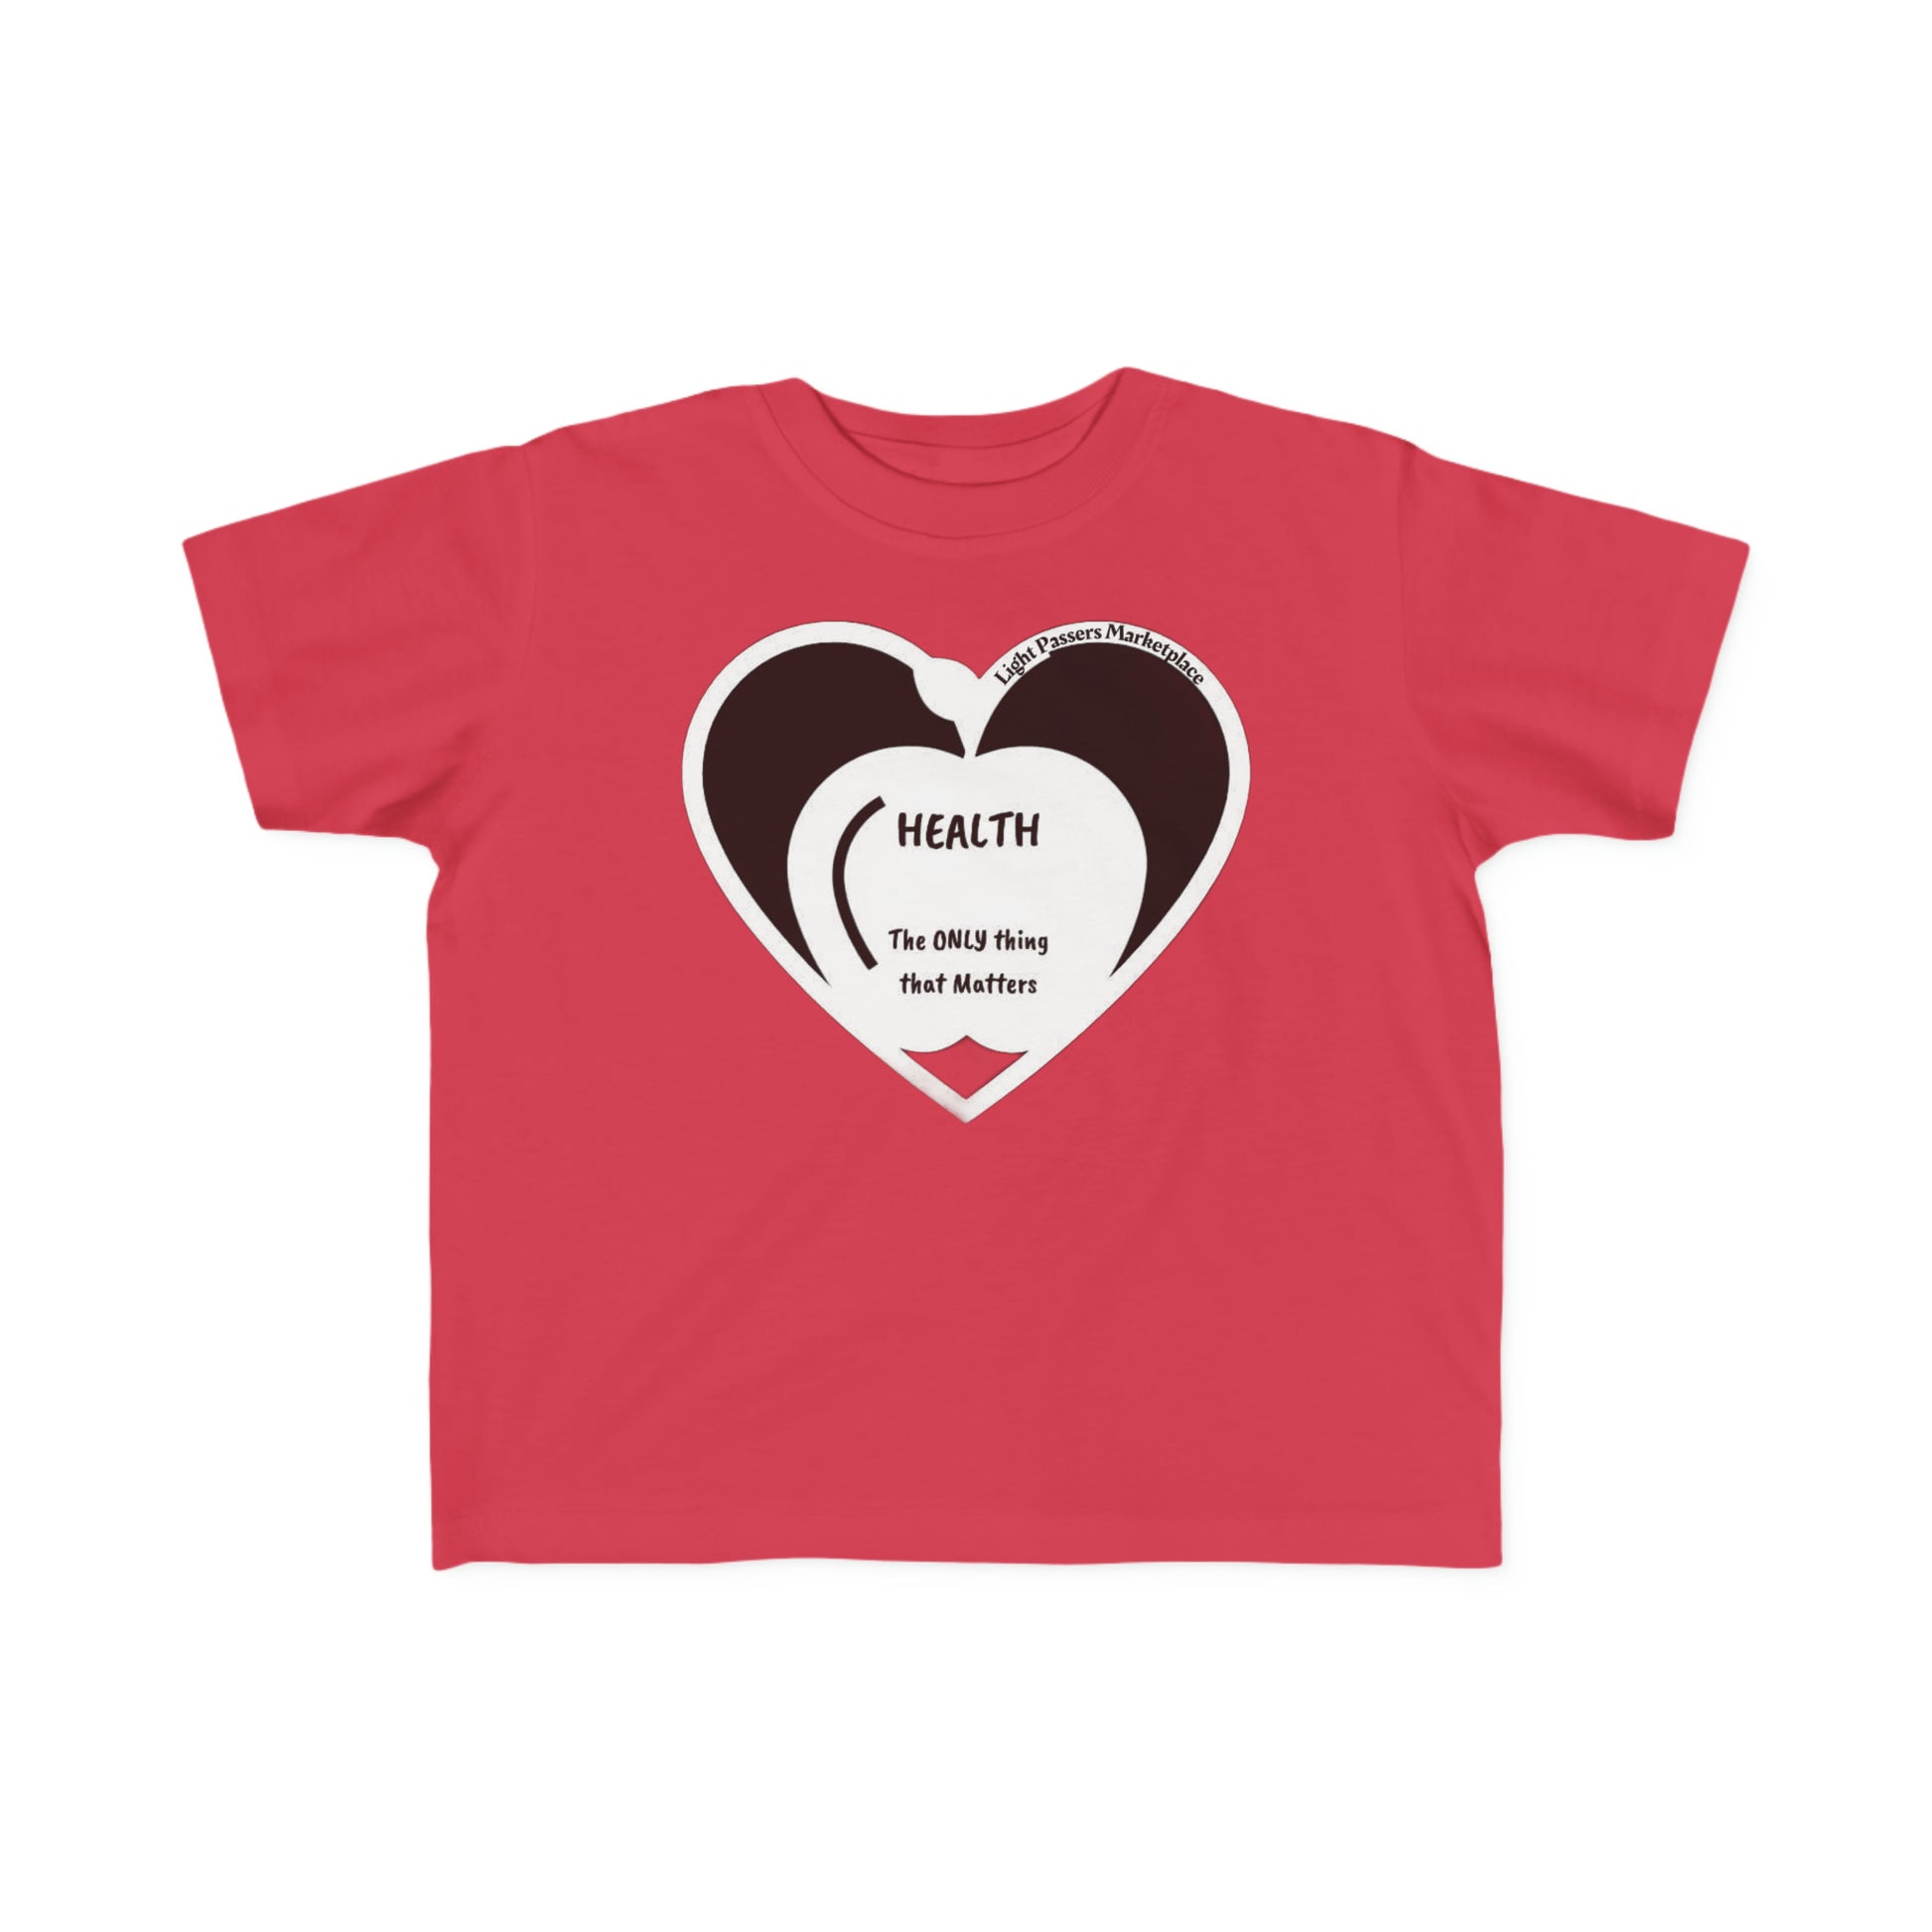 A red toddler t-shirt featuring a heart and text design, made of soft 100% combed cotton for sensitive skin. Durable print, light fabric, tear-away label, classic fit.